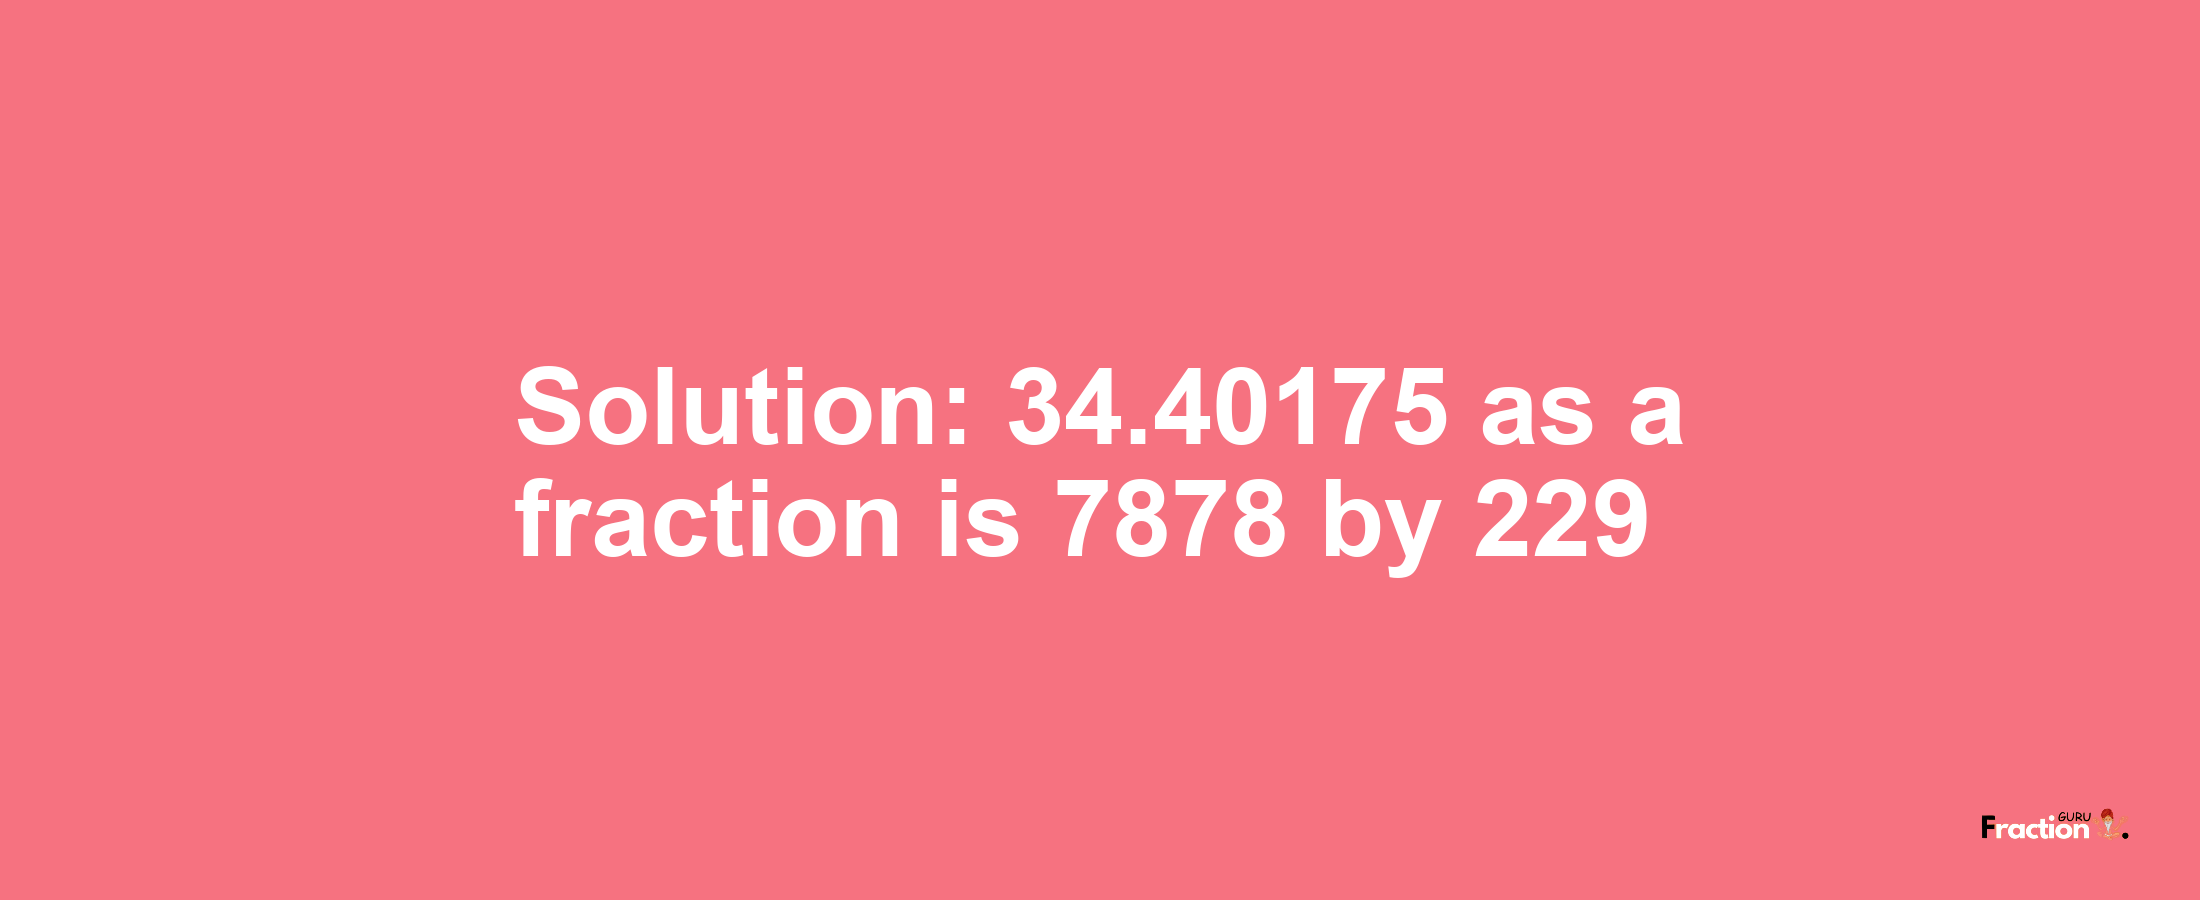 Solution:34.40175 as a fraction is 7878/229